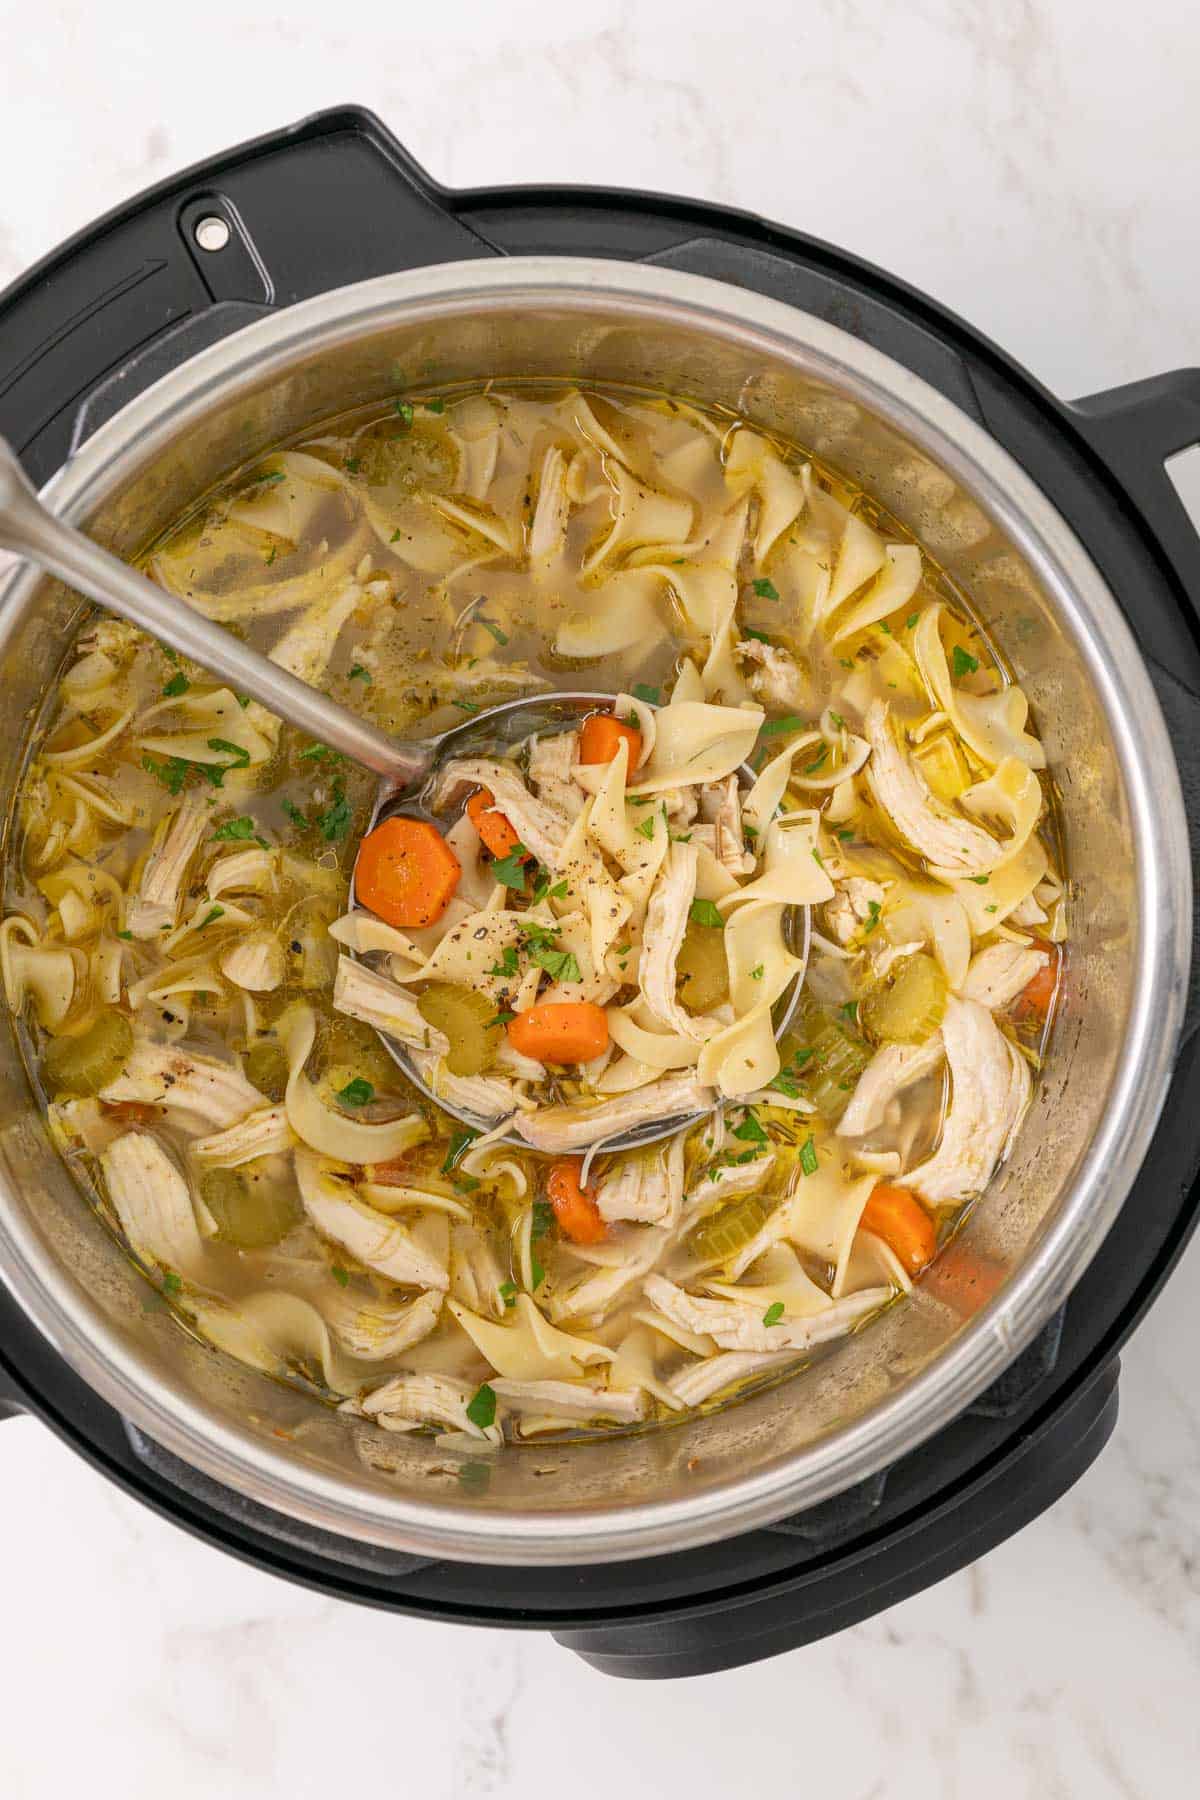 A ladle in an Instant Pot of chicken noodle soup.